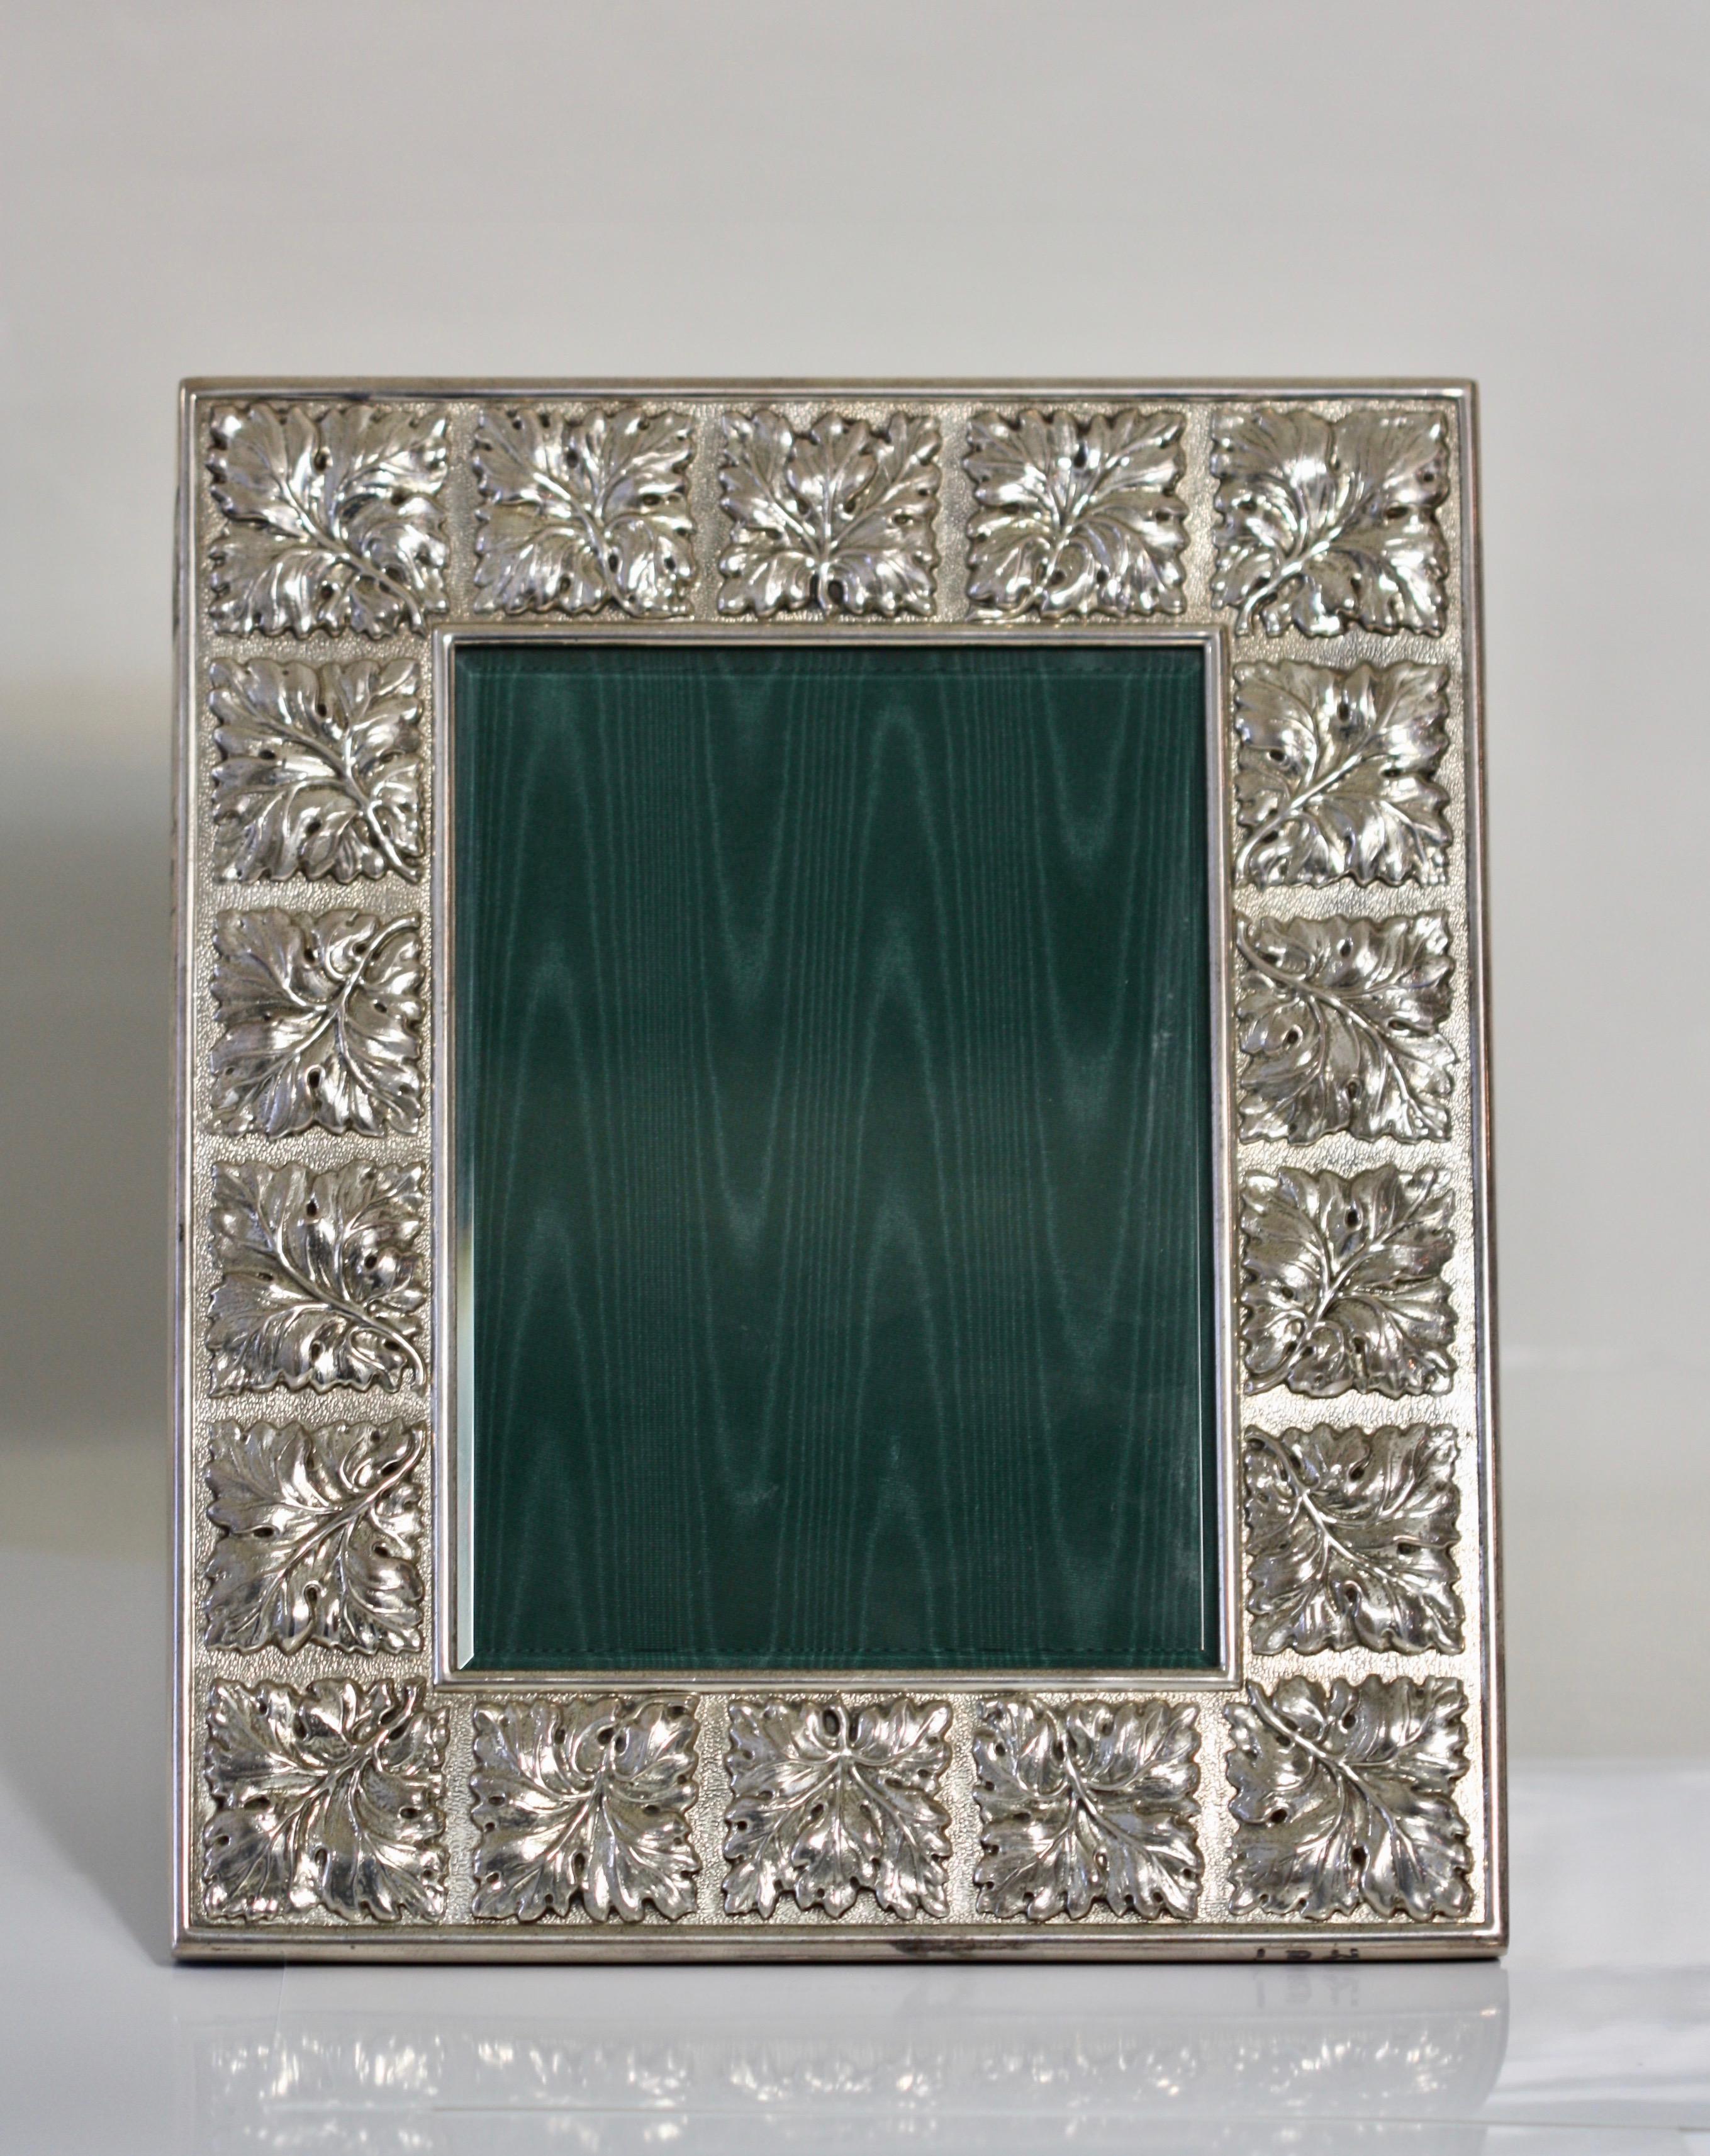 An Italian sterling silver picture frame, Buccellati, Milan, 20th century
black lacquer wood back
marked on bottom edge with maker's mark, stamped Buccelati
Measure: Height 10.75 in. (27.3 cm.)